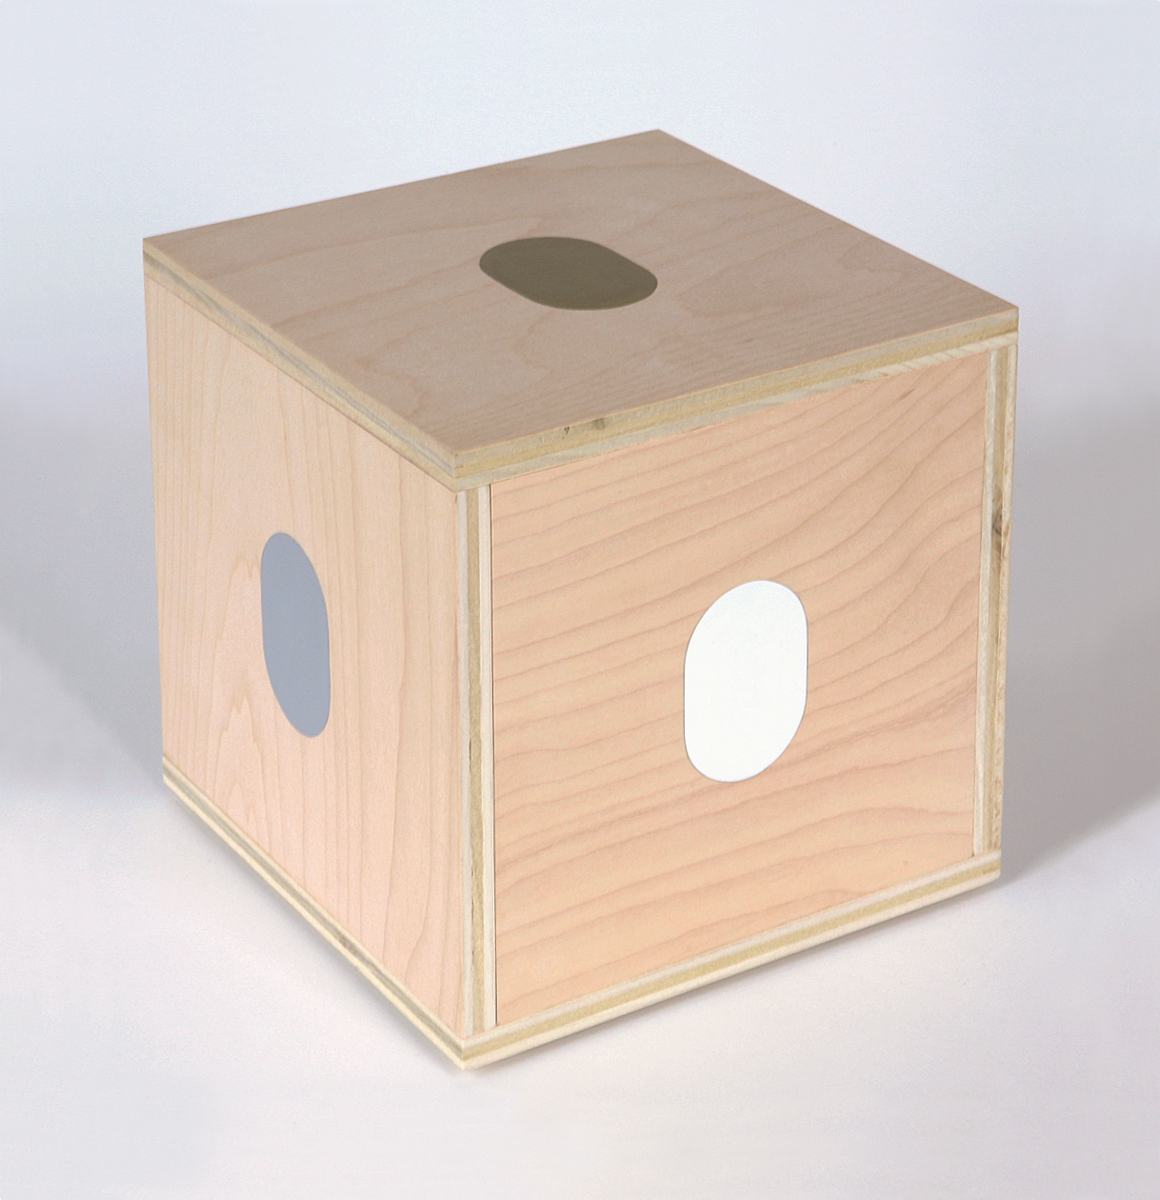 A plywood cube with gold, grey and white ovals painted on the top and sides.